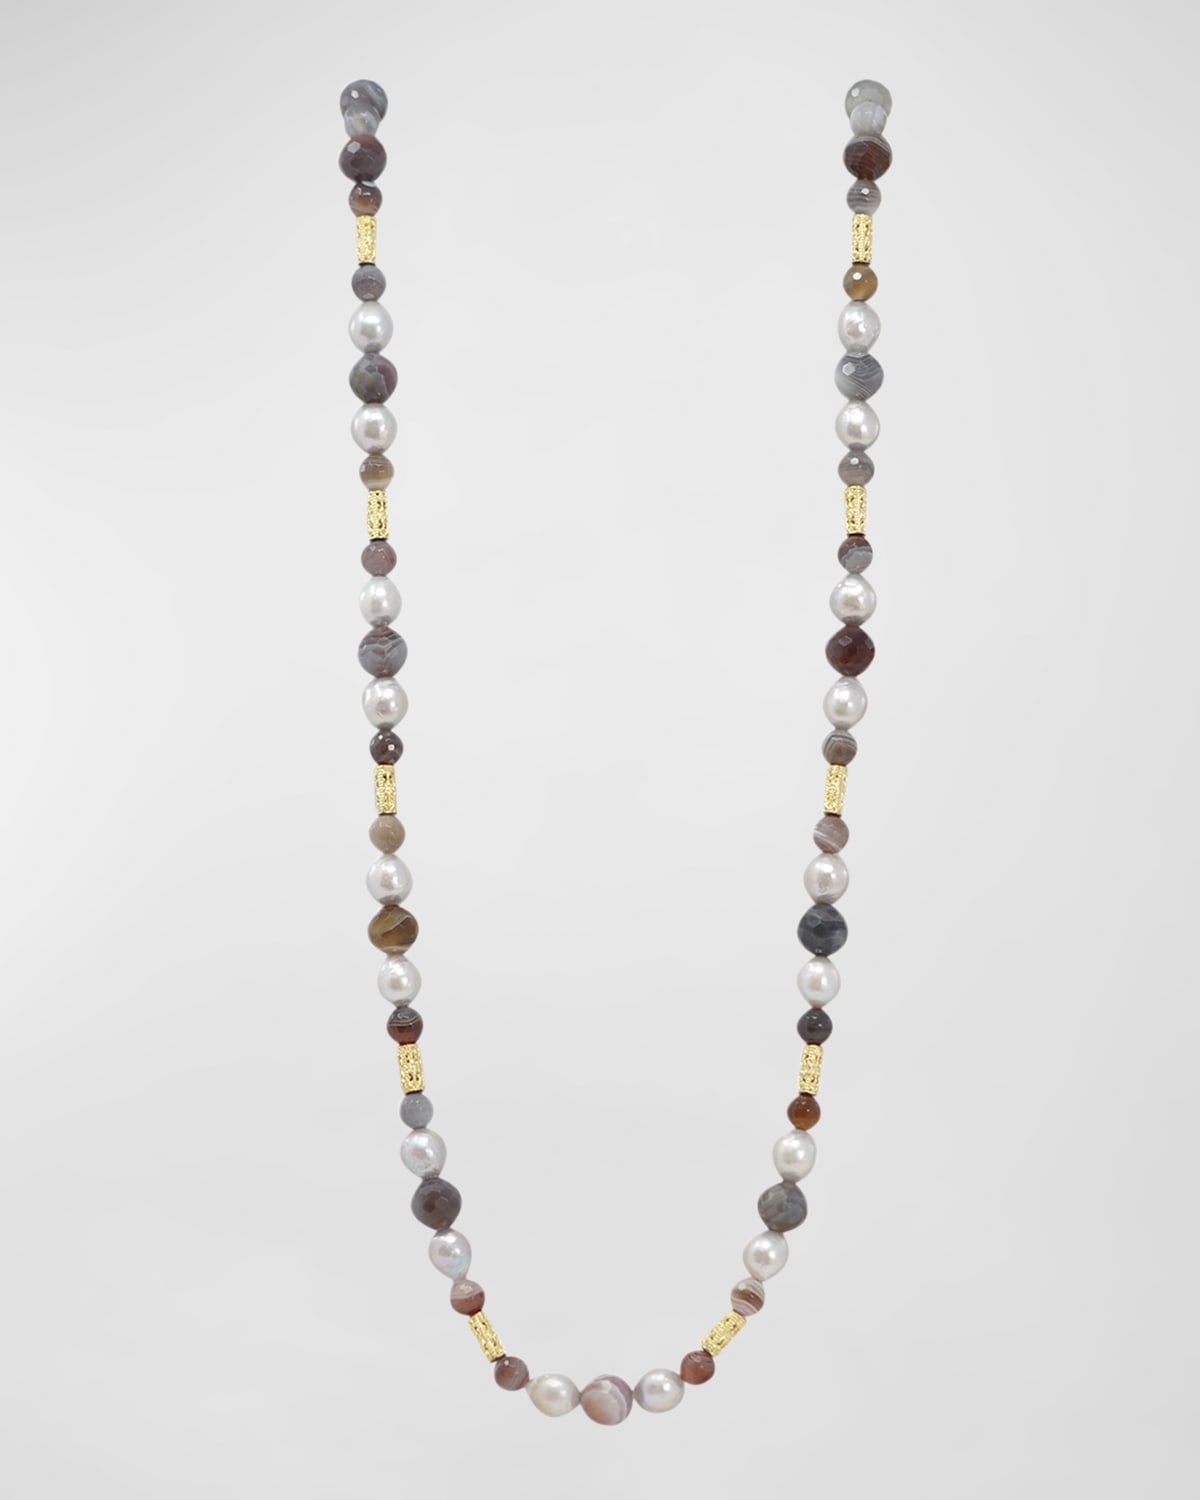 18K Yellow Gold Necklace with Botswana Agate and Pearls